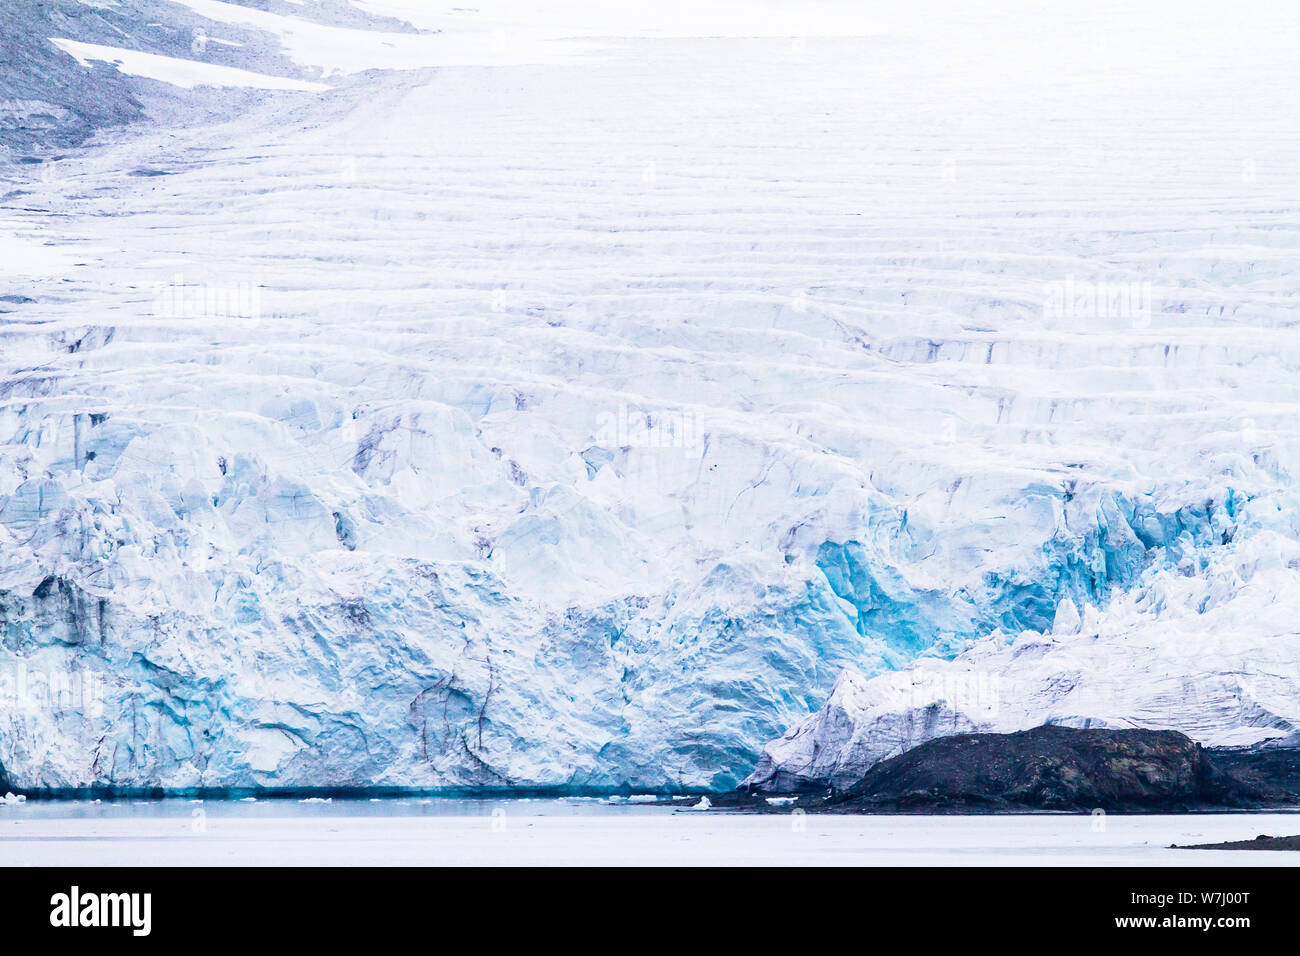 Repetitive rifts can be seen in a glacier descending to the sea in St Johnsfjorden / Prins Karls Forland in Svalbard.  These crevasses are caused by the constant movement of the glacier, causing tension between solid plates and the subsequent fracturing at weak points. Stock Photo